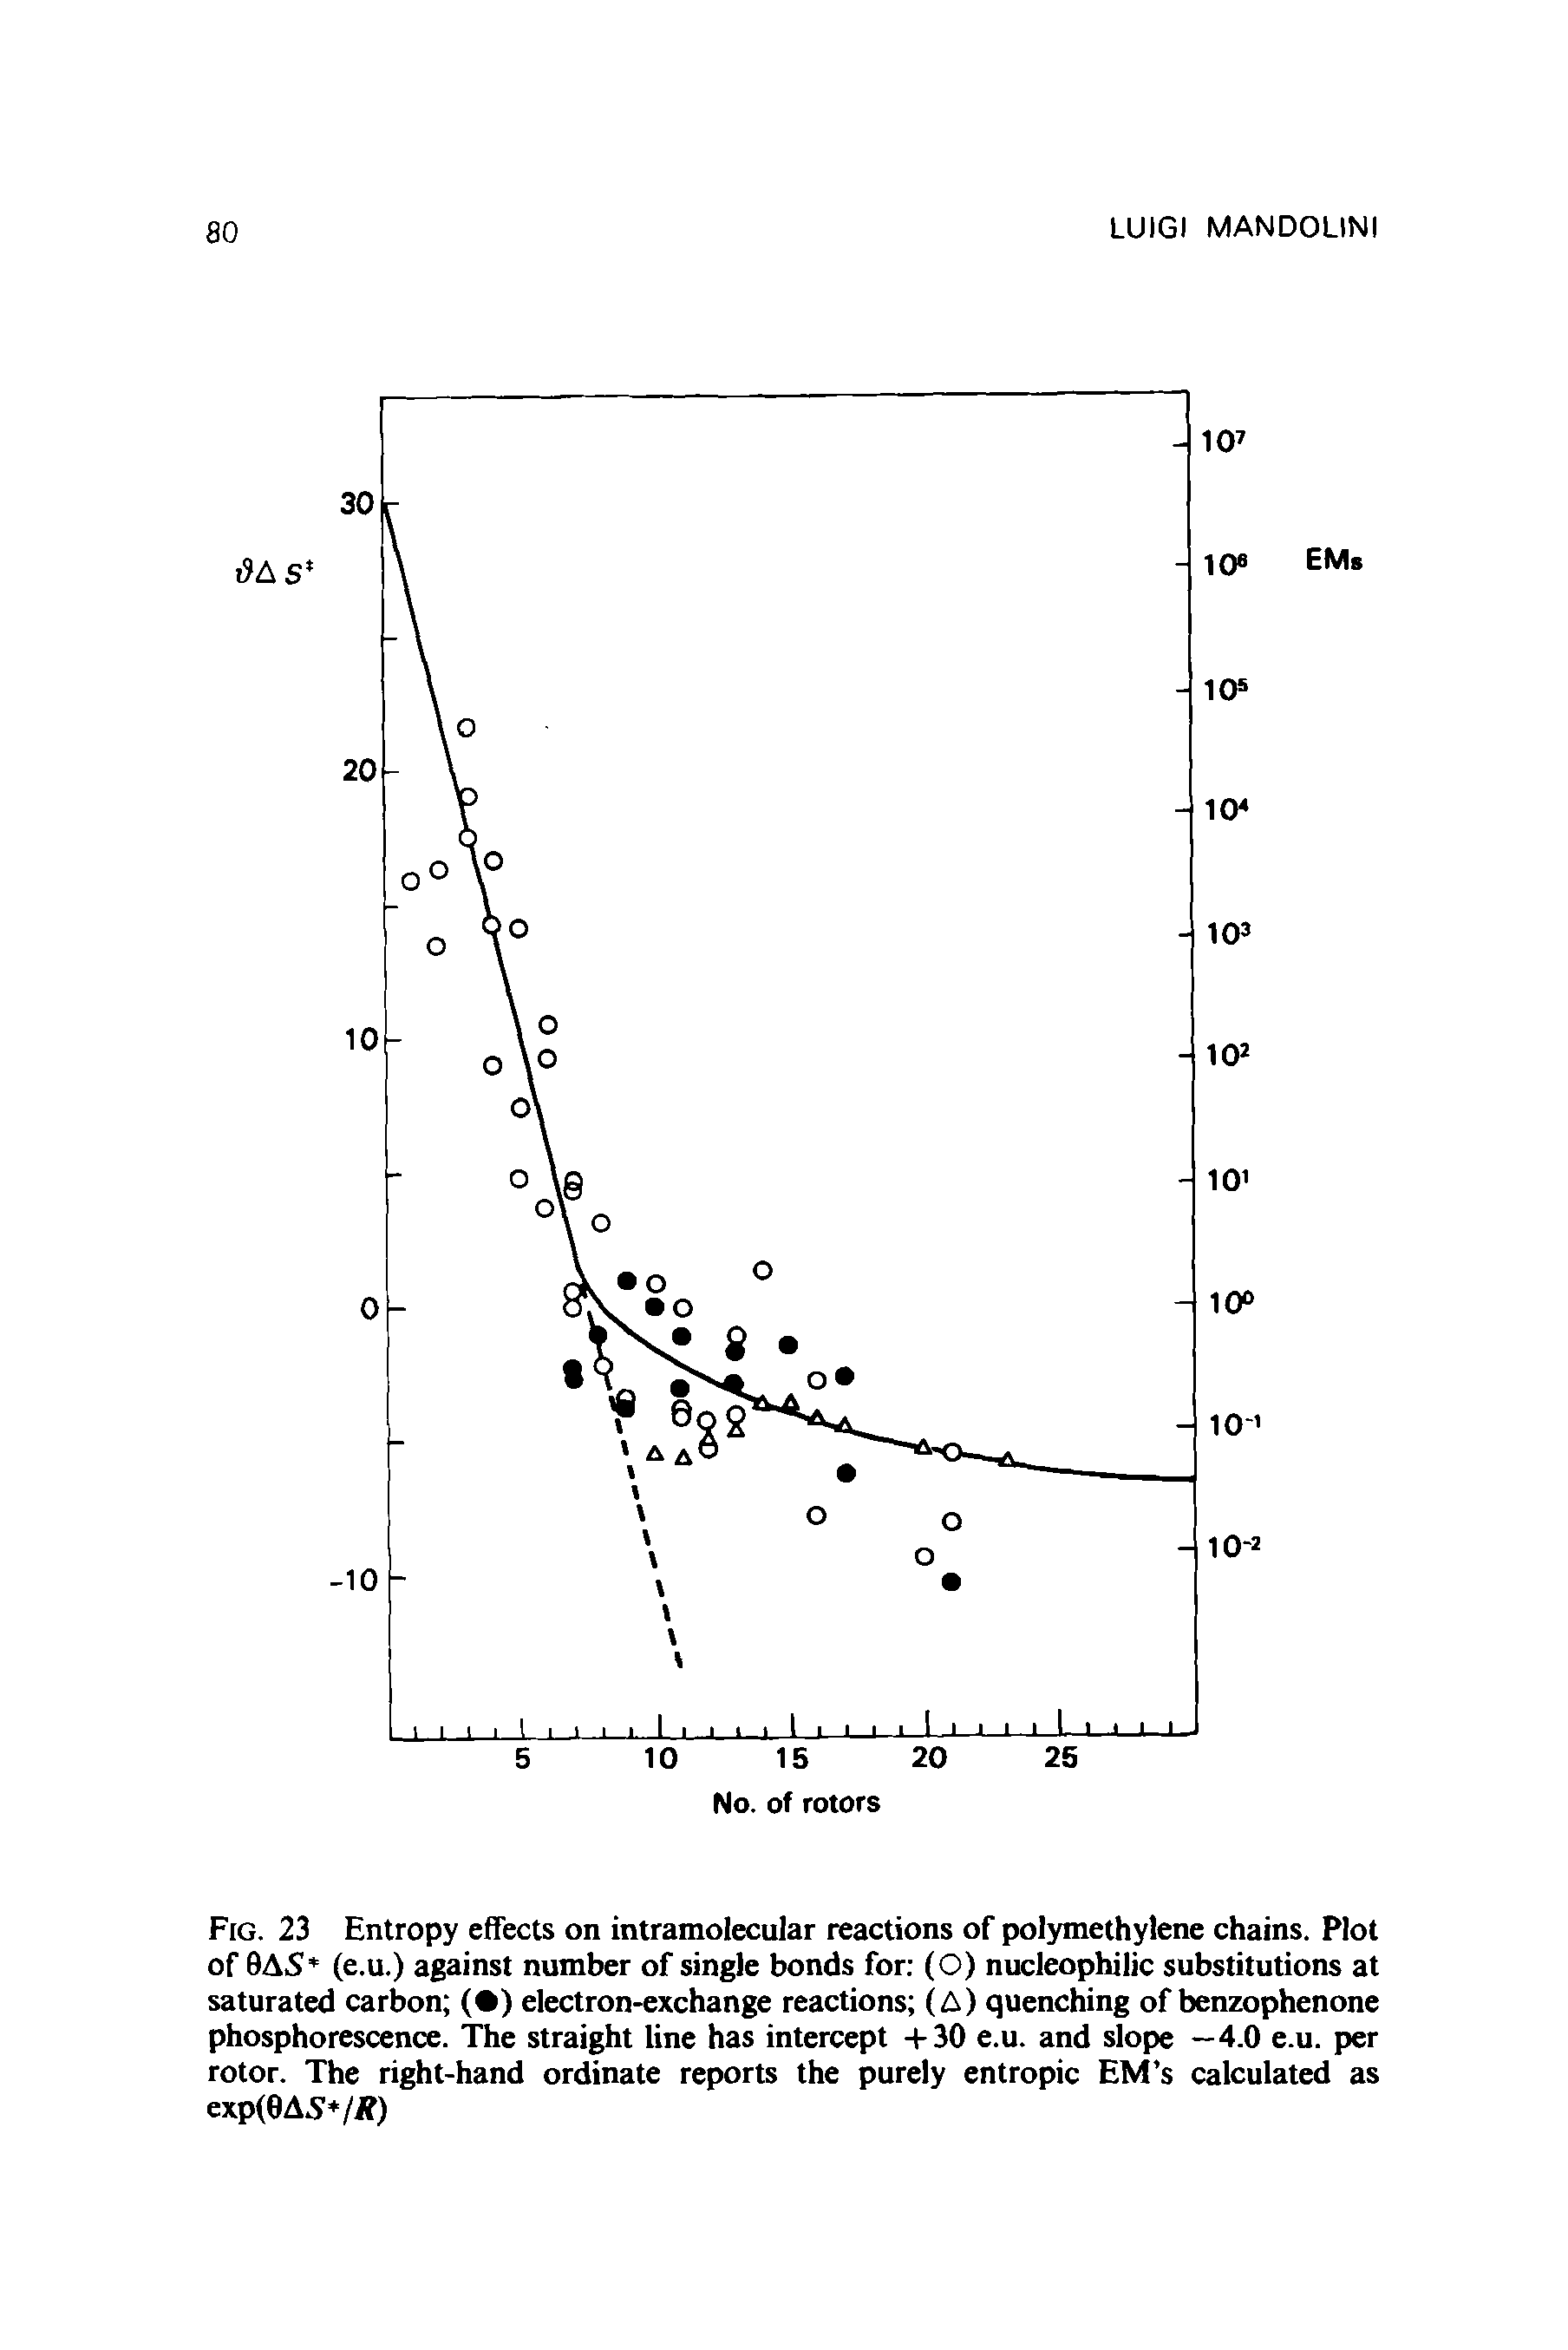 Fig. 23 Entropy effects on intramolecular reactions of polymethylene chains. Plot of 9AS (e.u.) against number of single bonds for (O) nucleophilic substitutions at saturated carbon ( ) electron-exchange reactions (A) quenching of benzophenone phosphorescence. The straight line has intercept +30 e.u. and slope —4.0 e.u. per rotor. The right-hand ordinate reports the purely entropic EM s calculated as exp(0AS /J )...